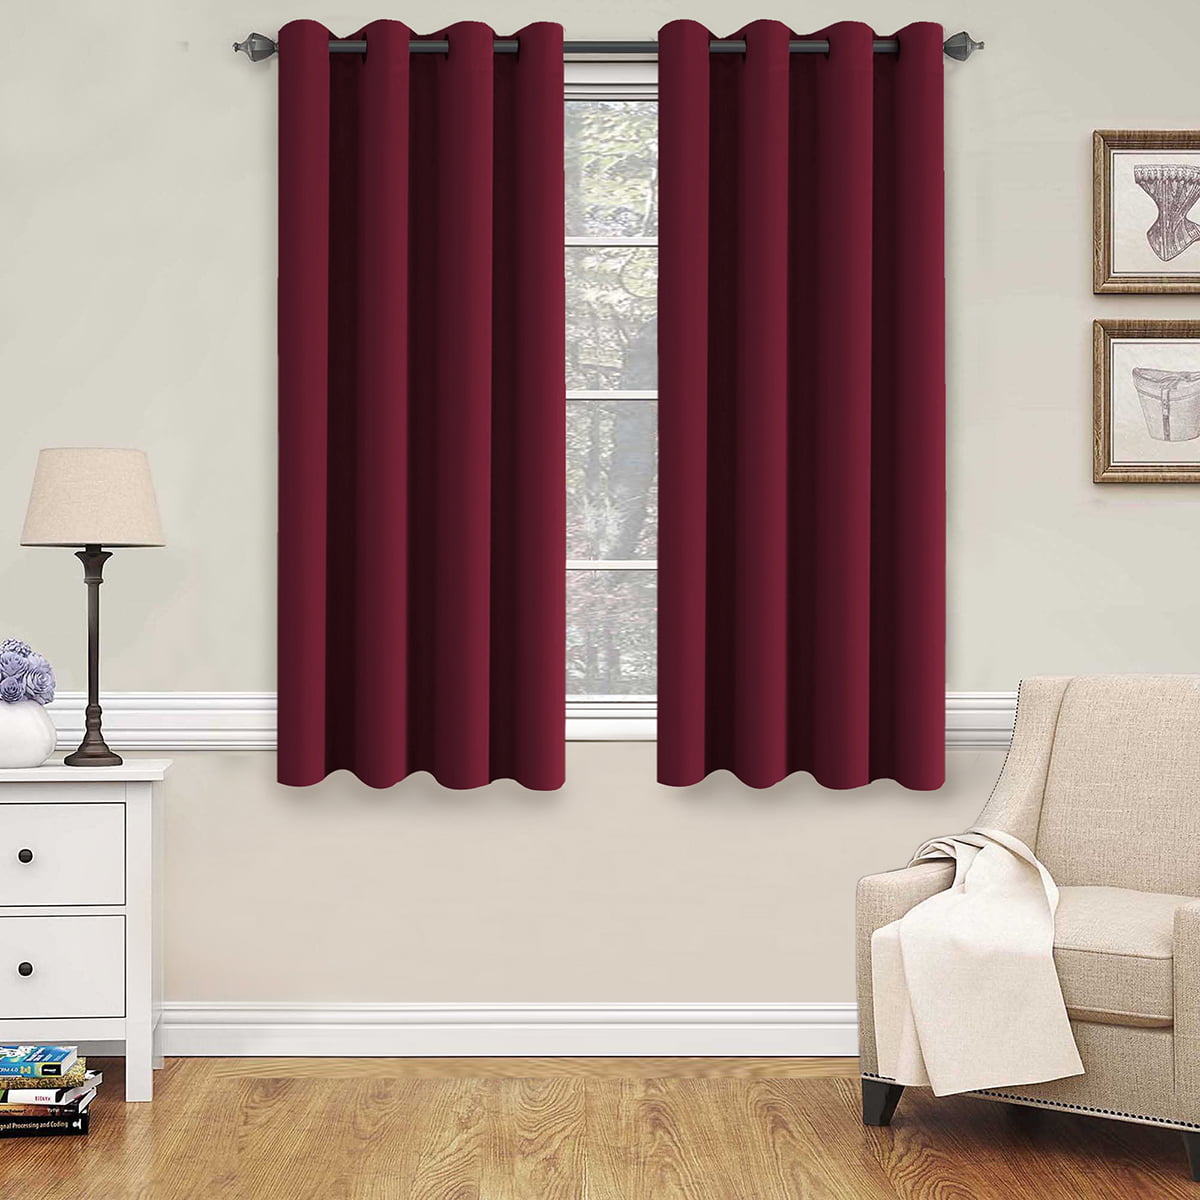 Grommet Thermal Insulated Summer Heat/Win Texlab Blackout Curtains for Bedroom